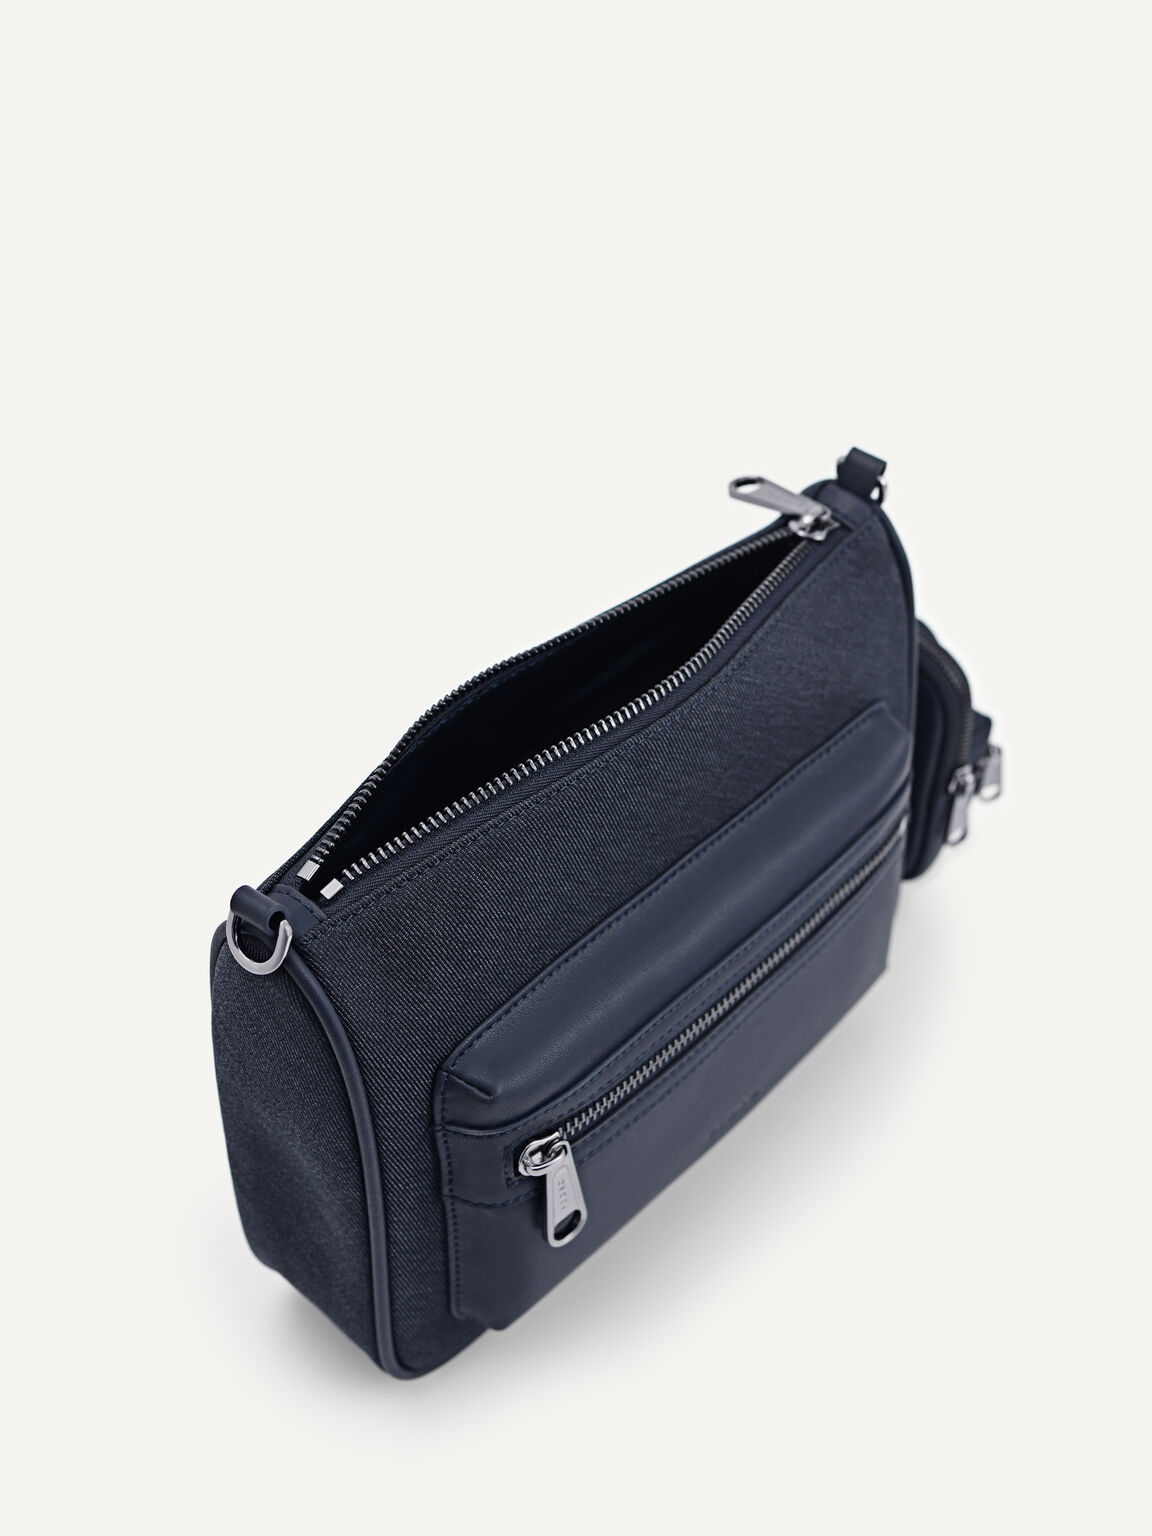 Denim Sling Bag with Pouch, Navy